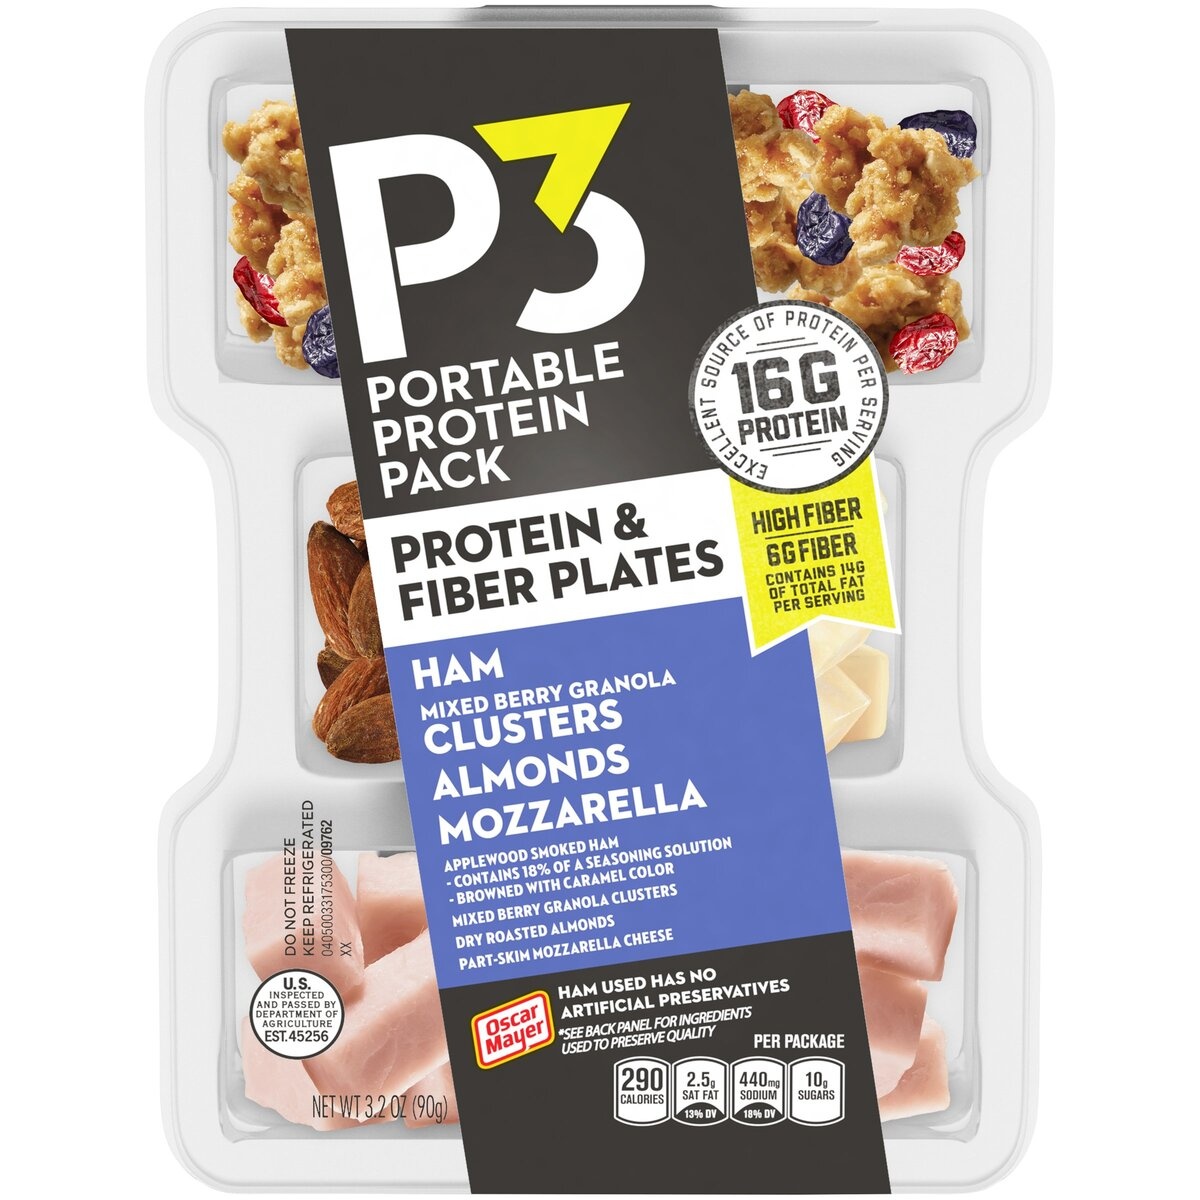 slide 1 of 8, P3 Portable Protein Snack Pack & Fiber Plate with Ham, Mixed Berry Granola Clusters, Almonds & Mozzarella Cheese Tray, 3.2 oz